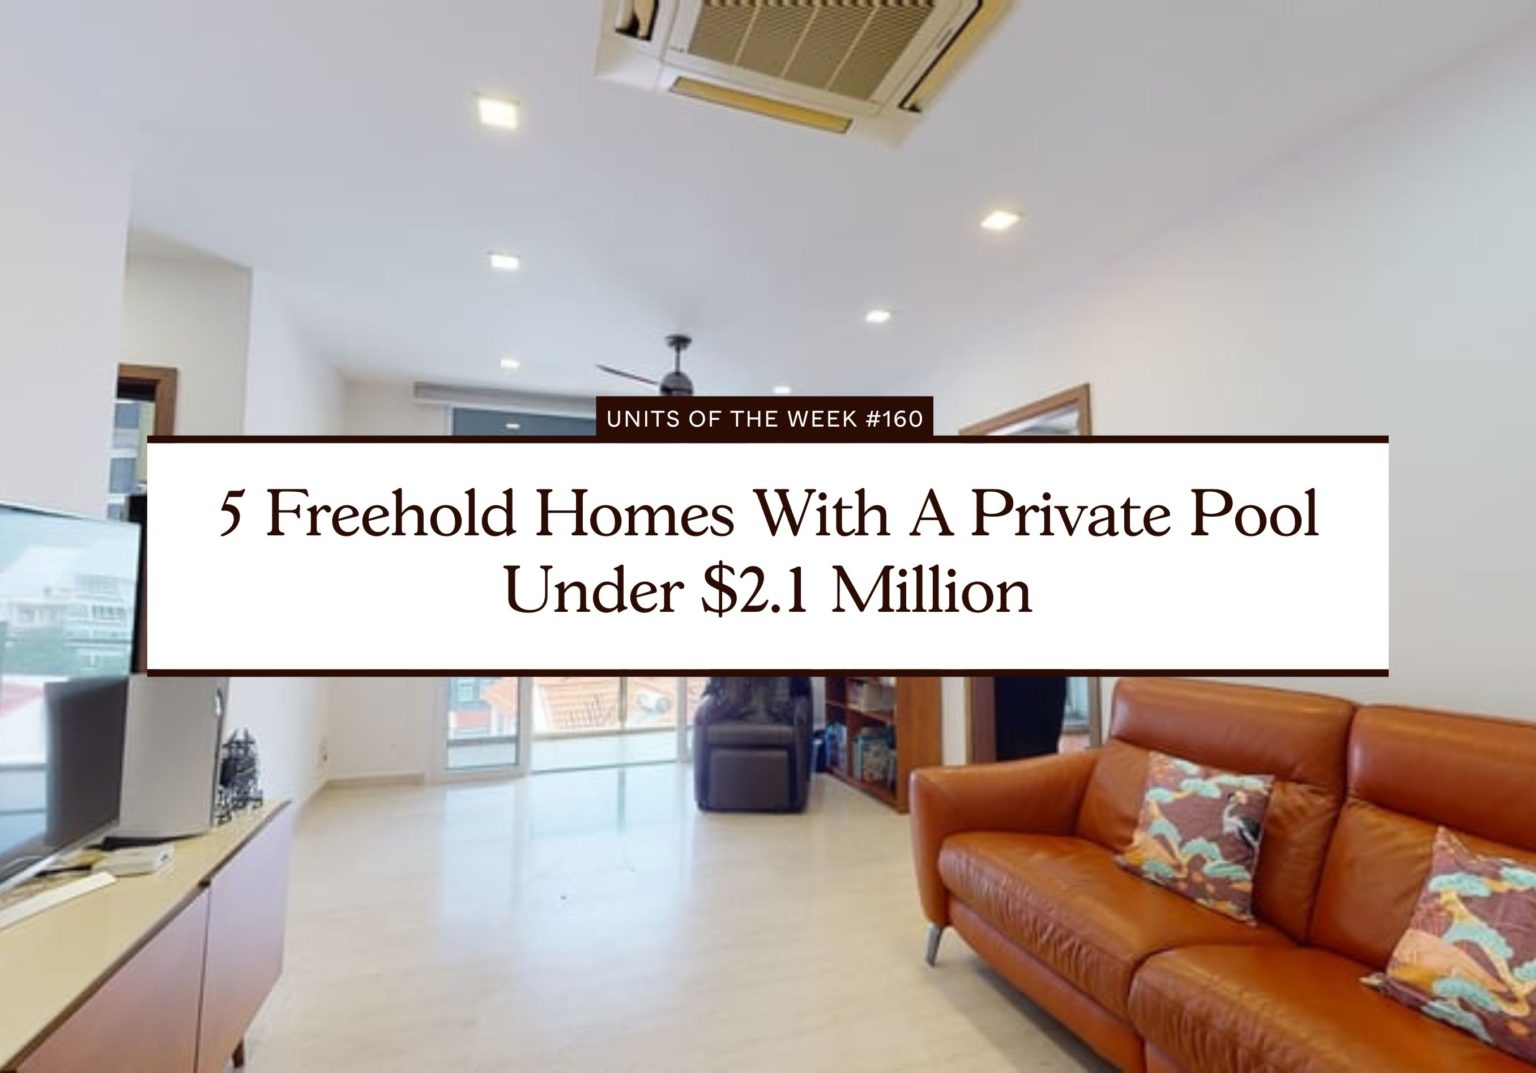 5 Freehold Homes With A Private Pool Under 2.1 Million